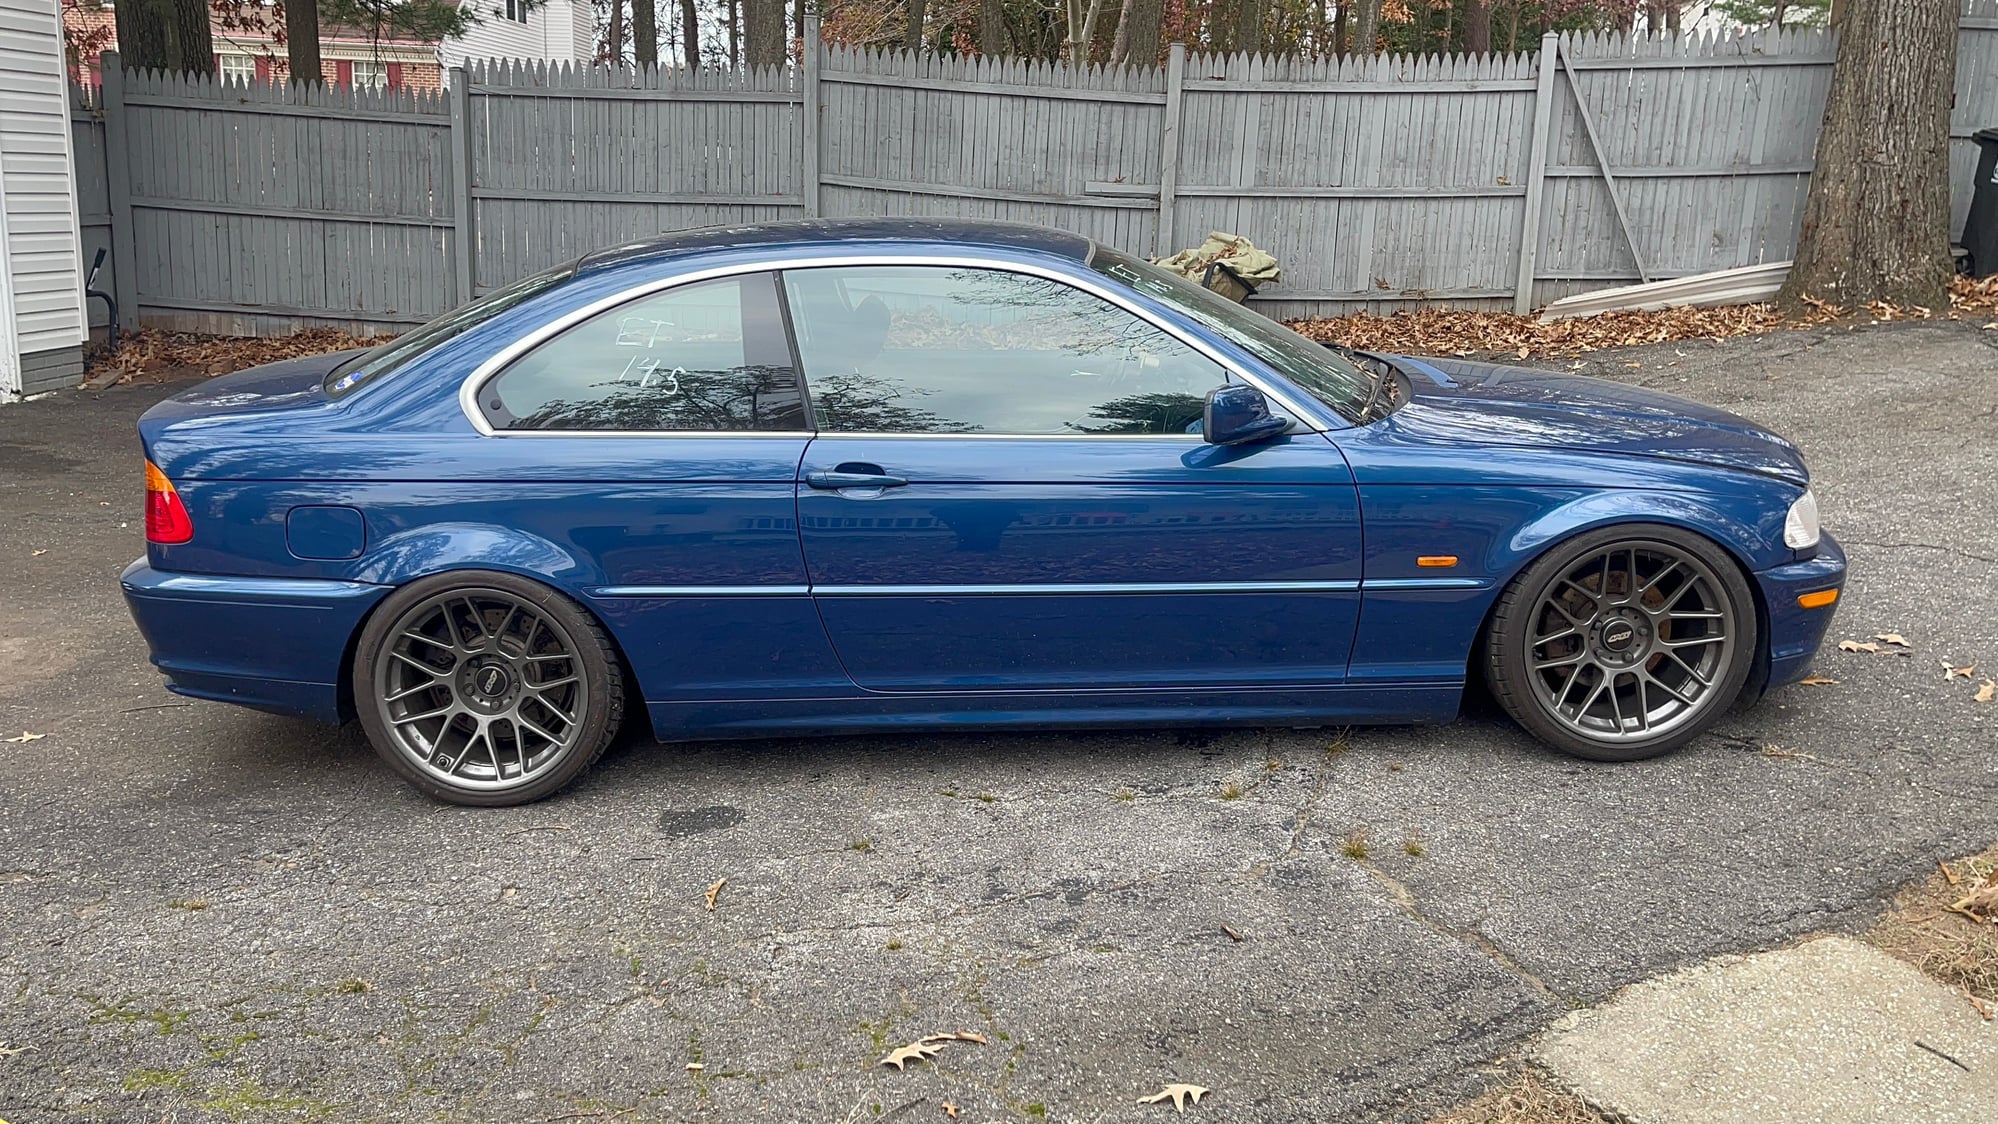 2001 BMW 325Ci - LS Swapped E46 BMW - Used - VIN 09876543211234567 - 150,000 Miles - 8 cyl - 2WD - Manual - Coupe - Blue - Oxon Hill, MD 20745, United States